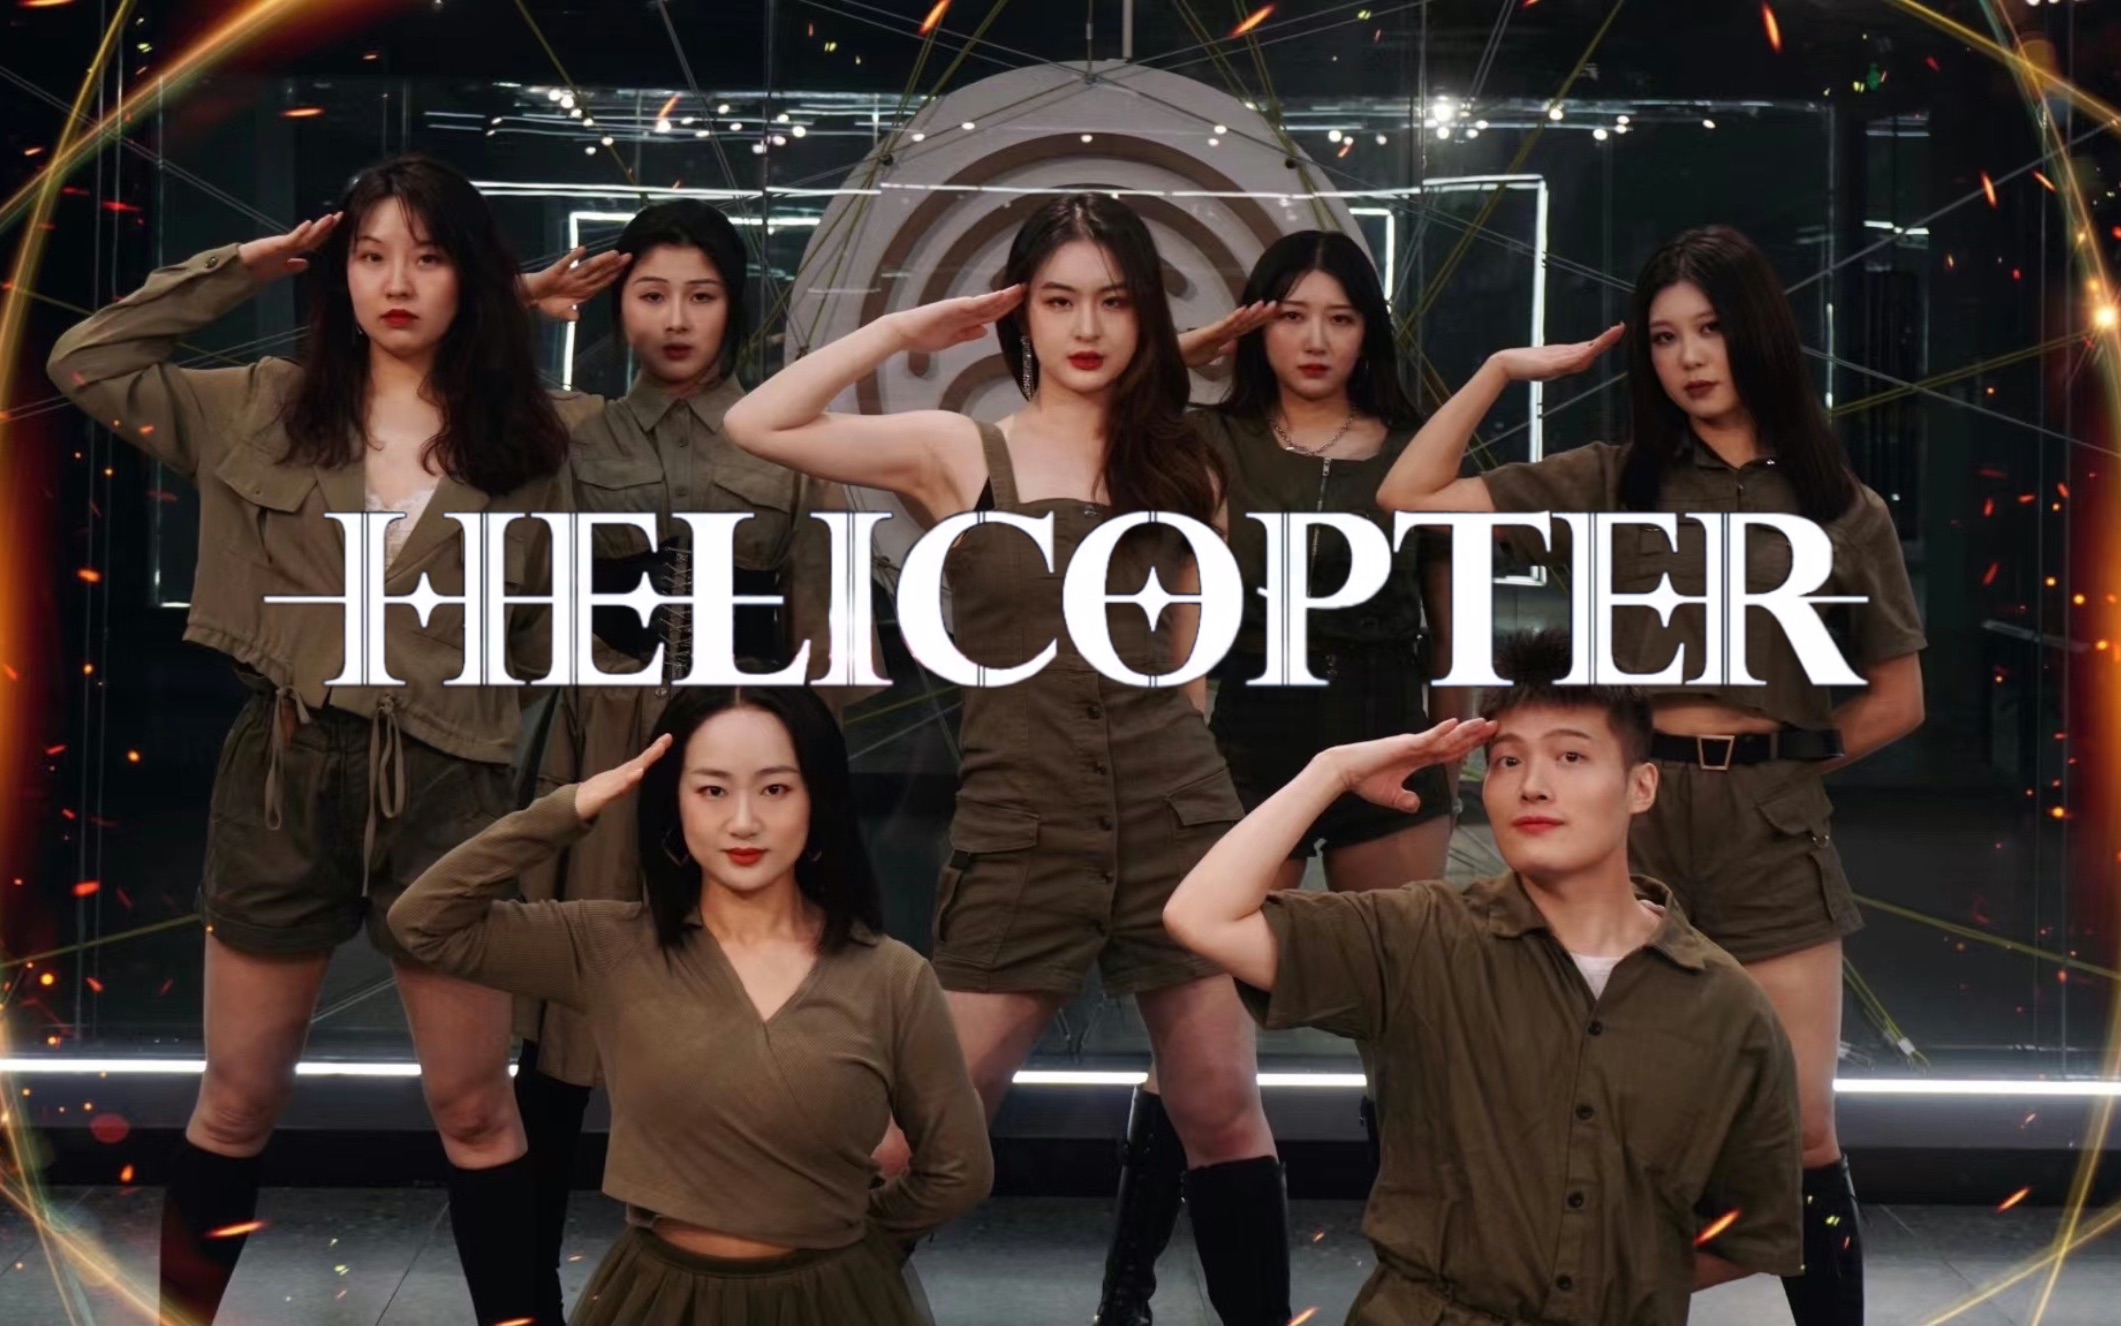 【CLC】全员帅气！helicopter 直升机炸裂团魂 光速起飞！